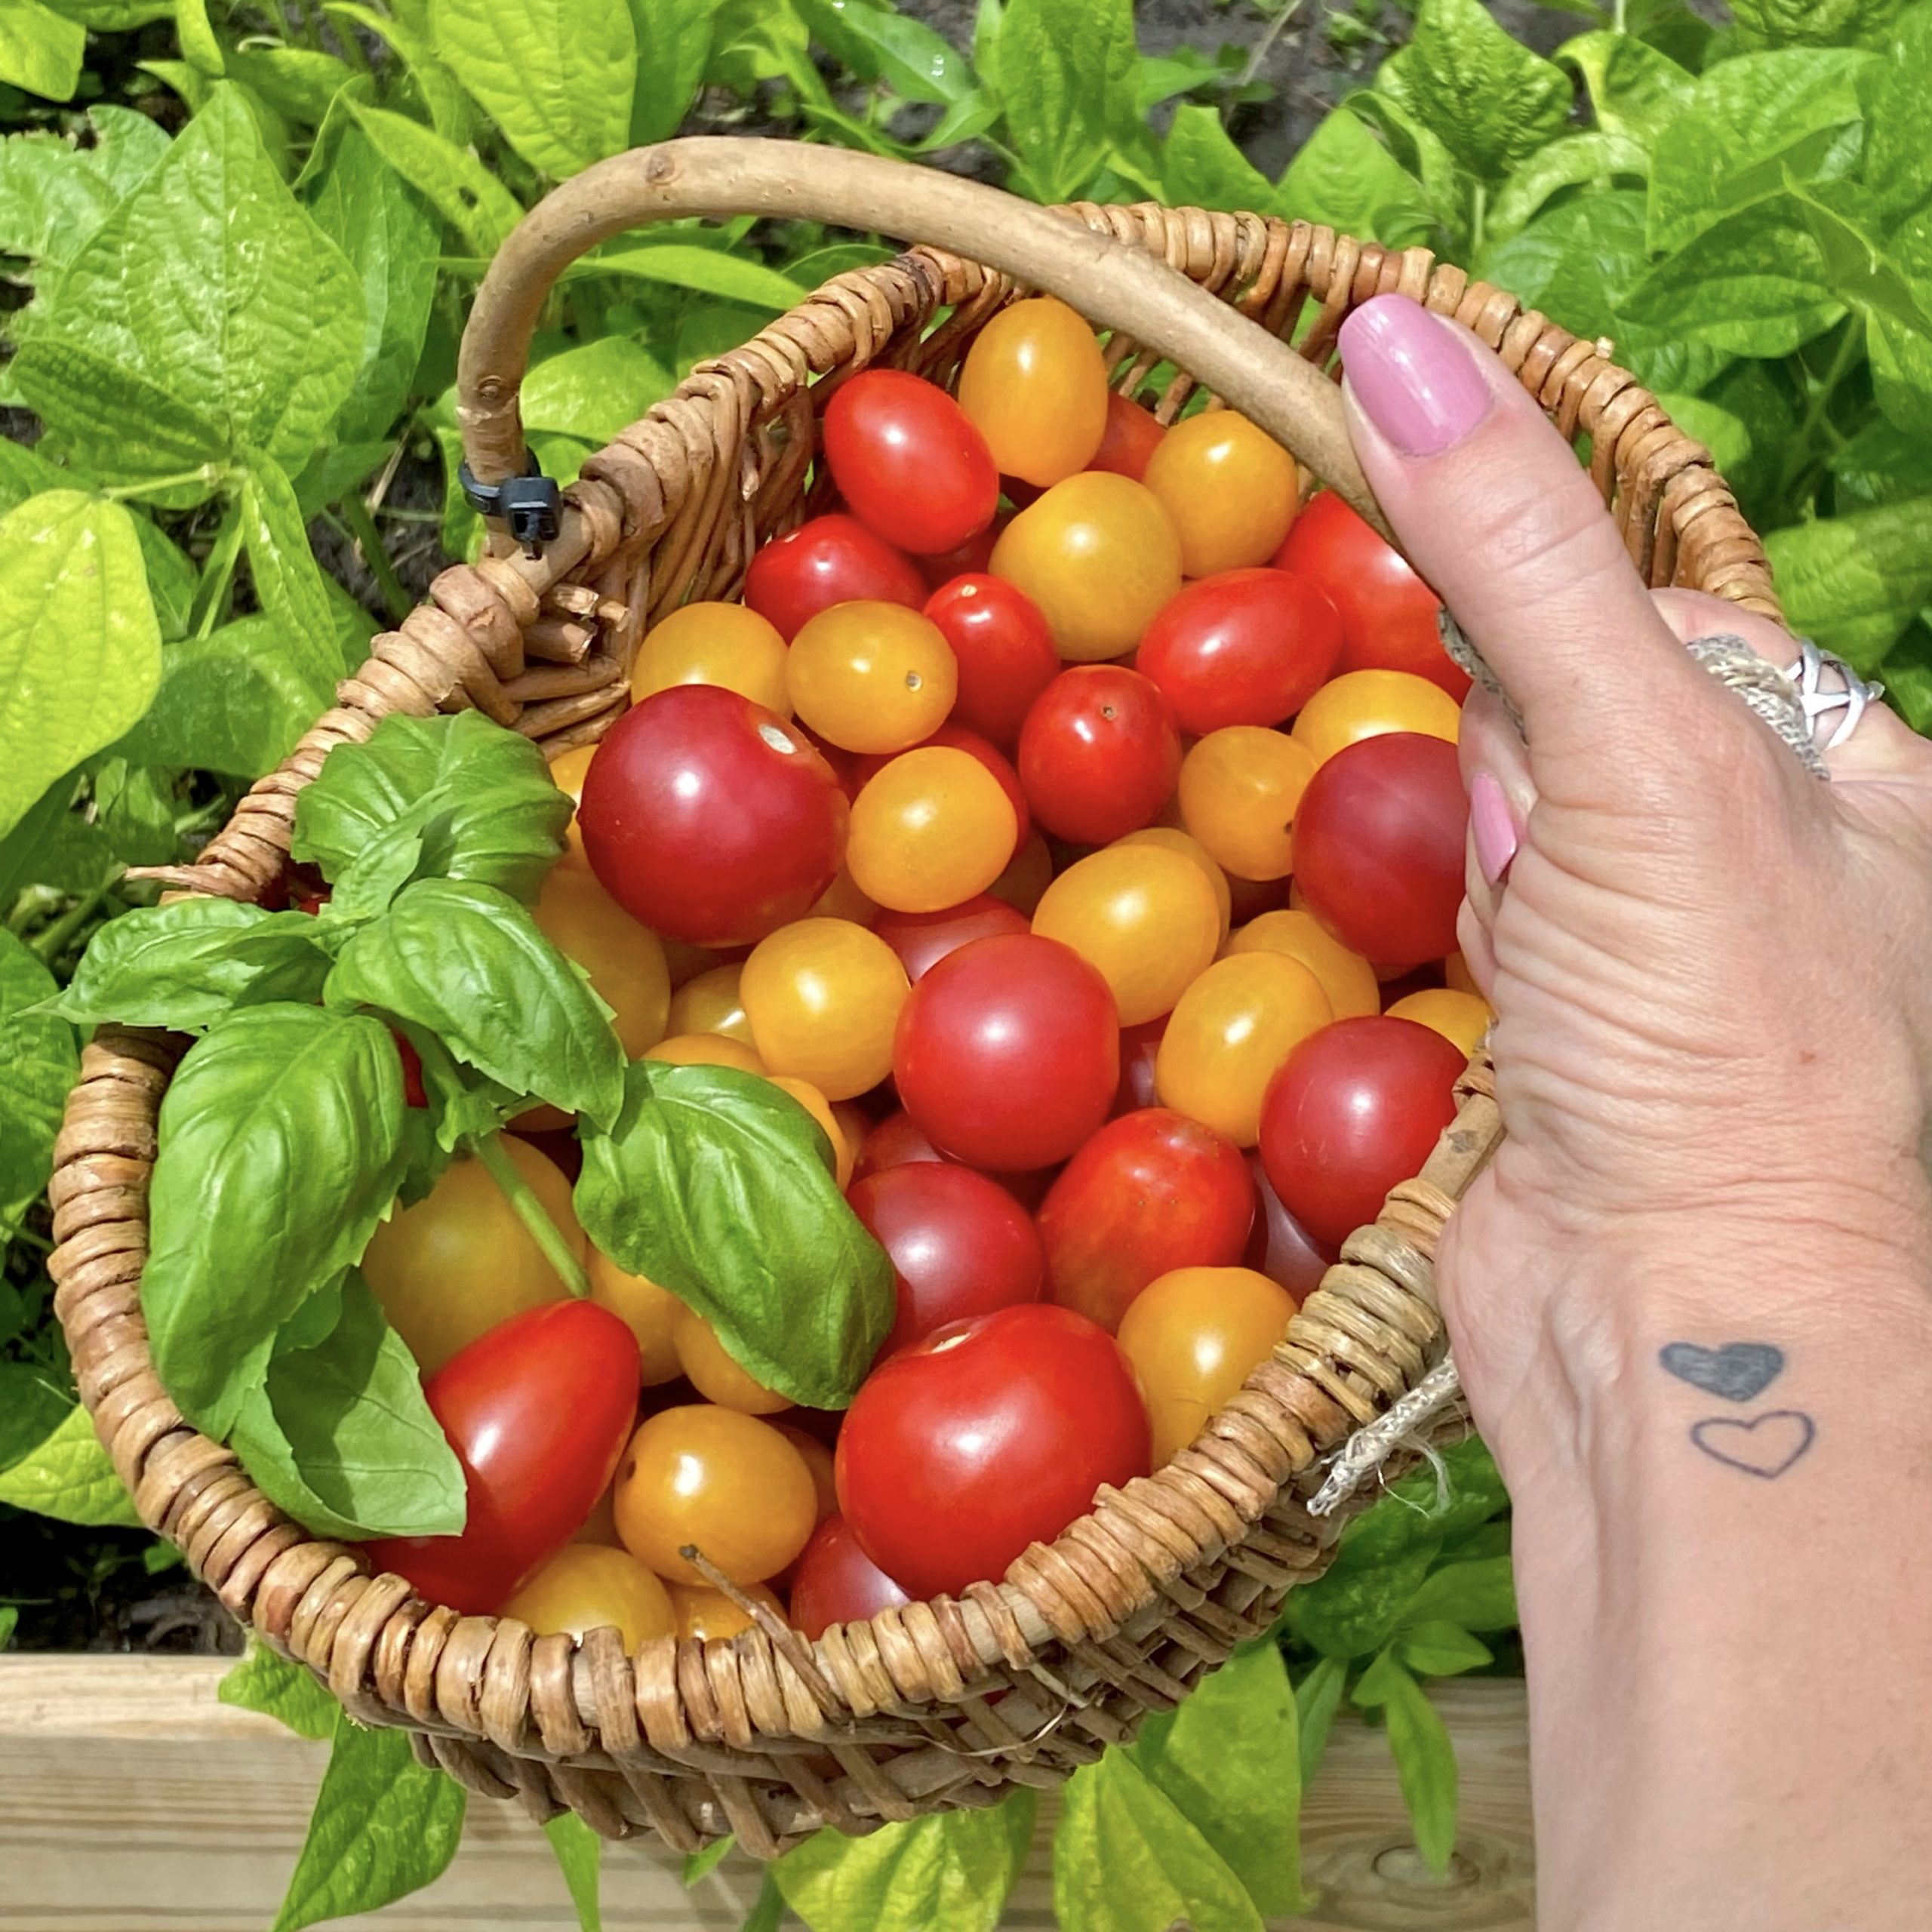 A basket filled with yellow and red cherry tomatoes with a sprig of basil in it.